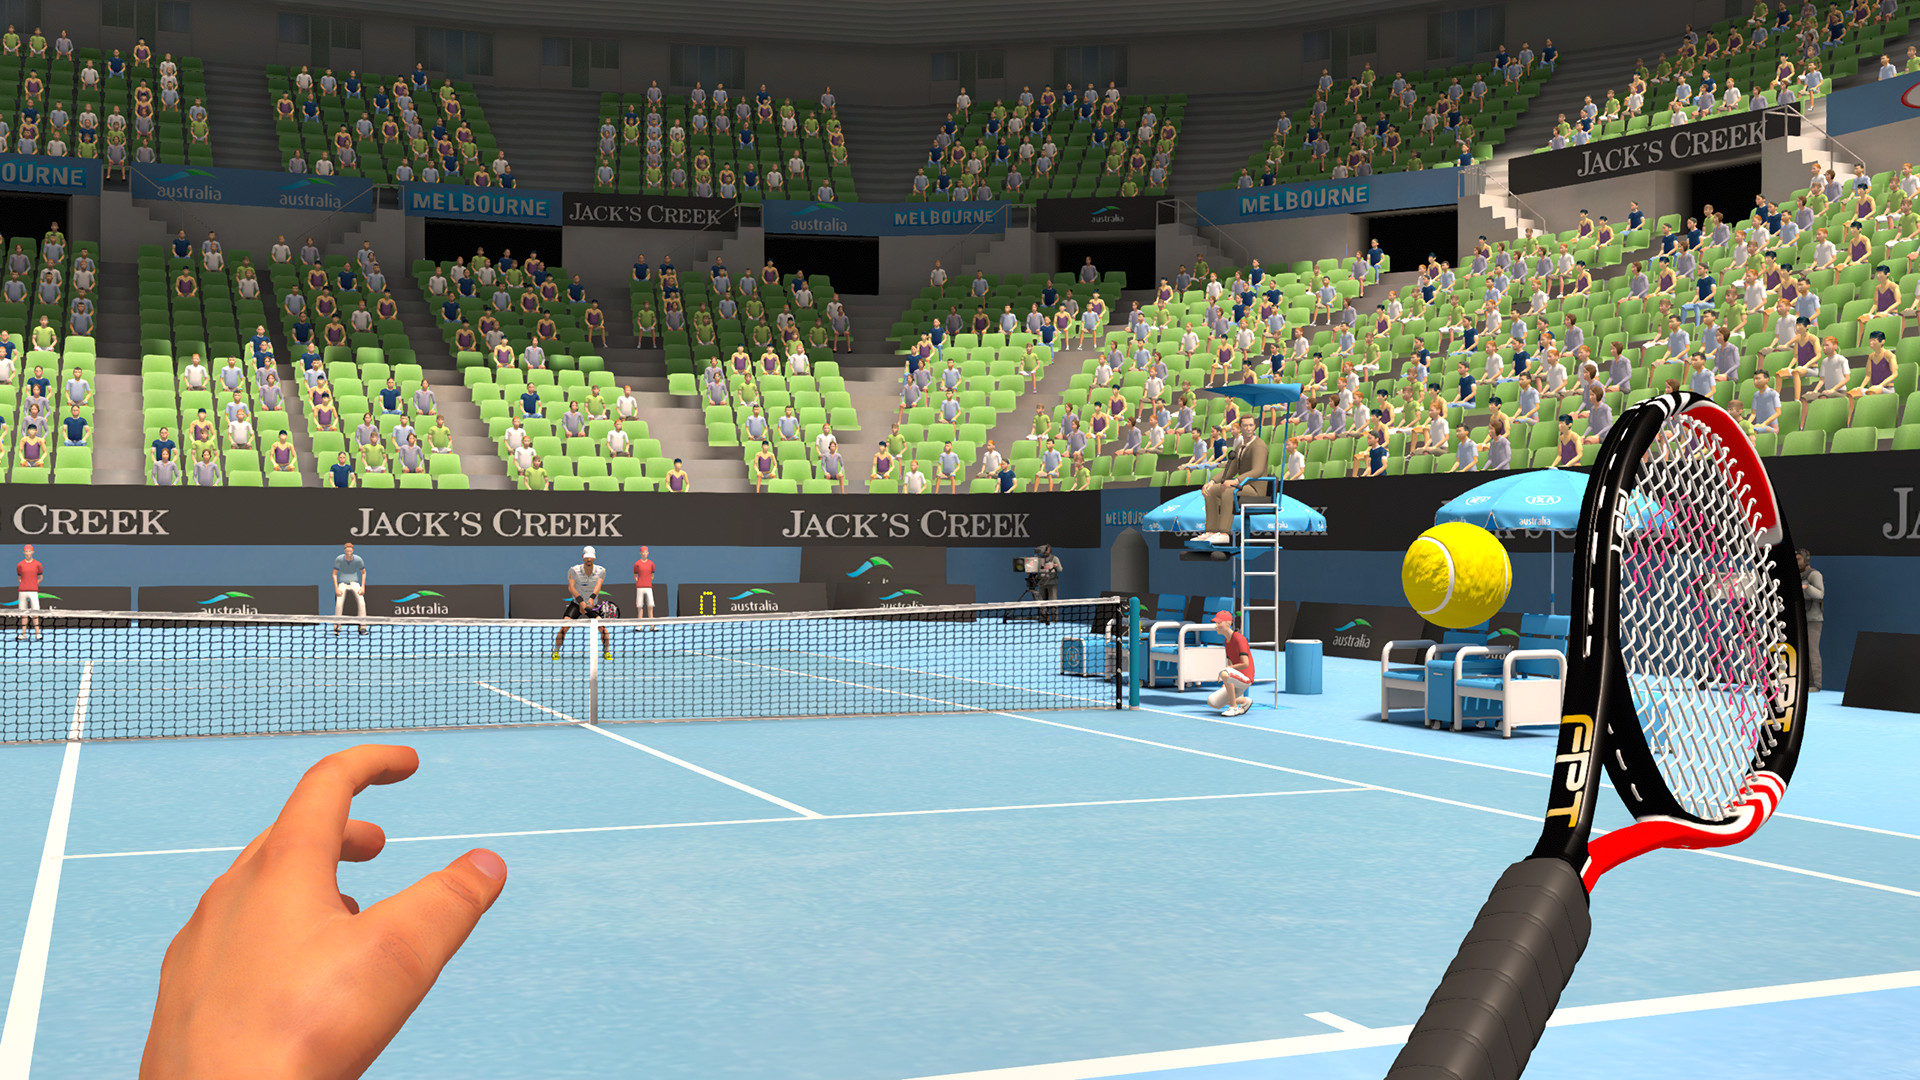 First Person Tennis - The Real Tennis Simulator on